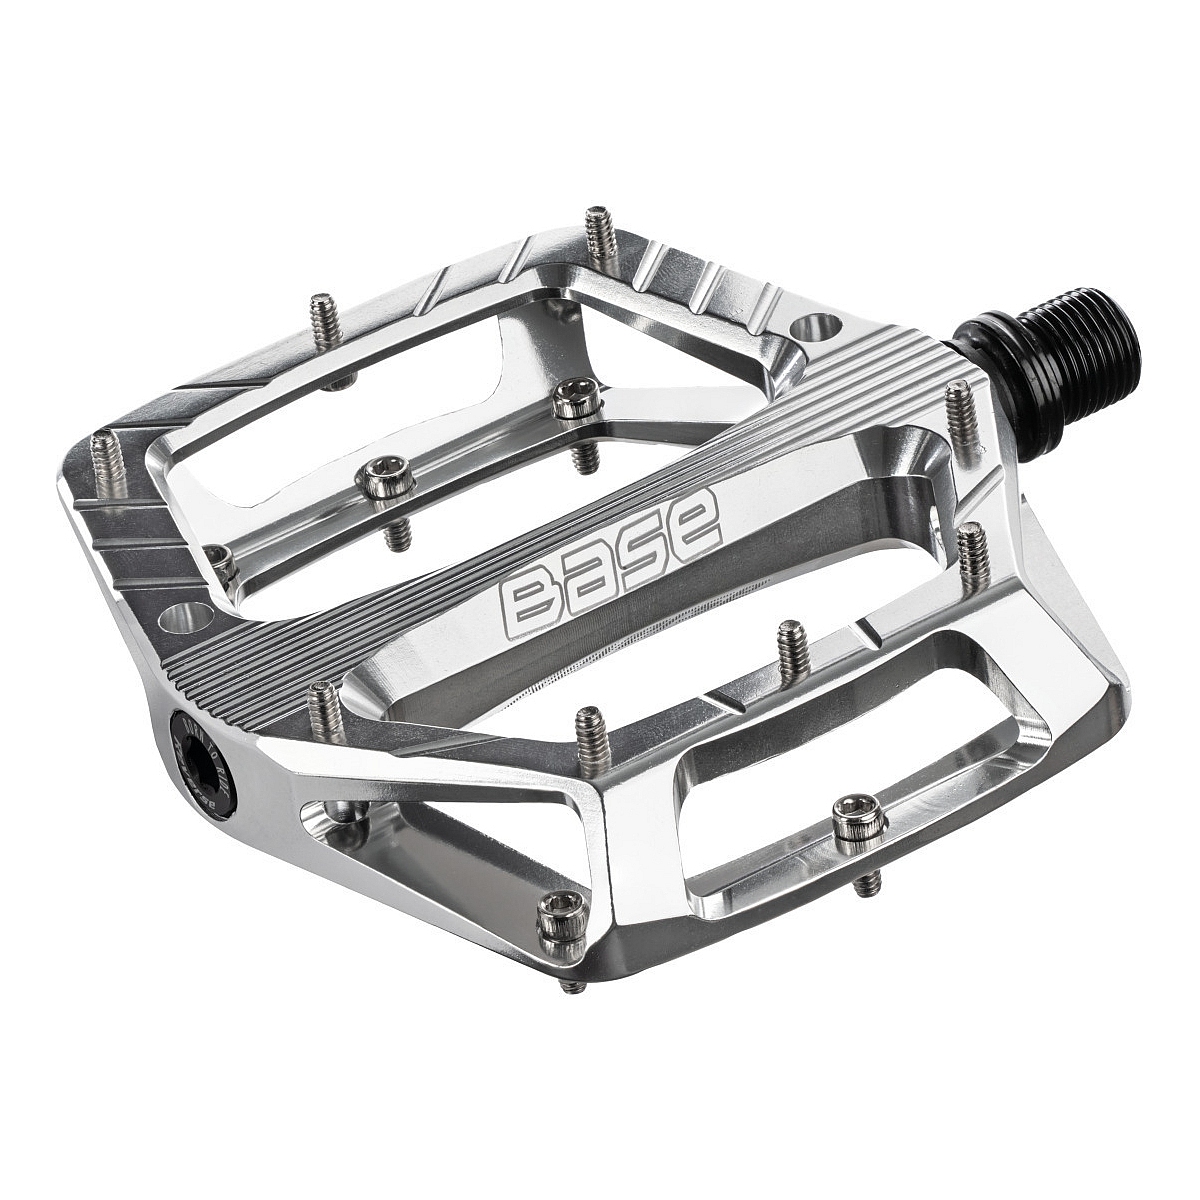 Picture of Reverse Components BASE Flat Pedals - silver